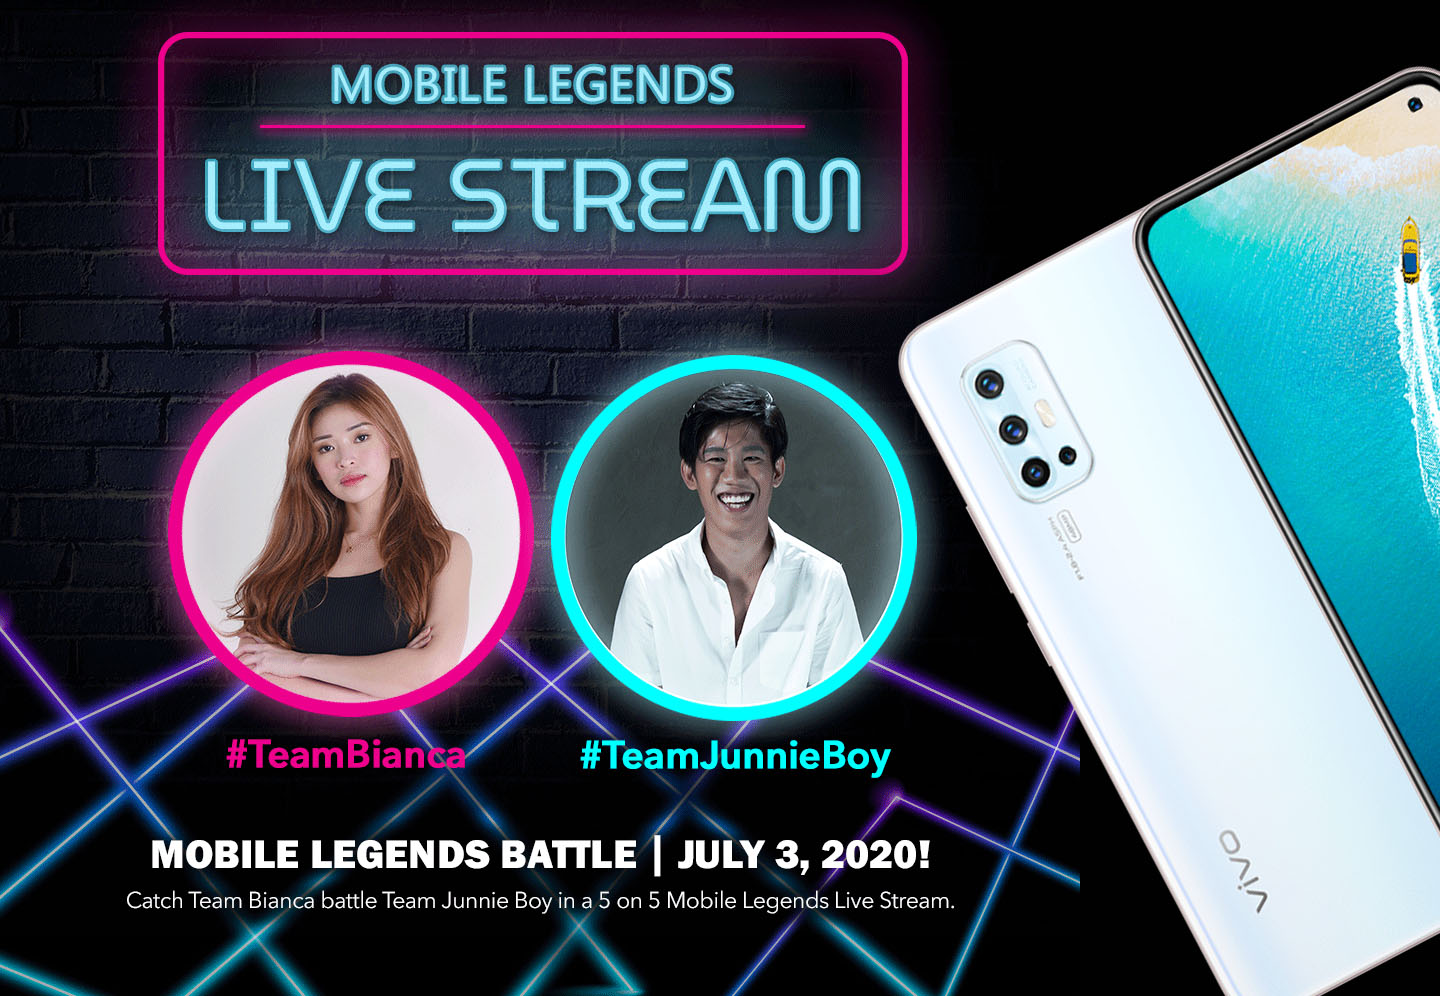 vivo Mobile Legends event hosts gaming face-off with Junnie Boy and Bianca Yao on July 3